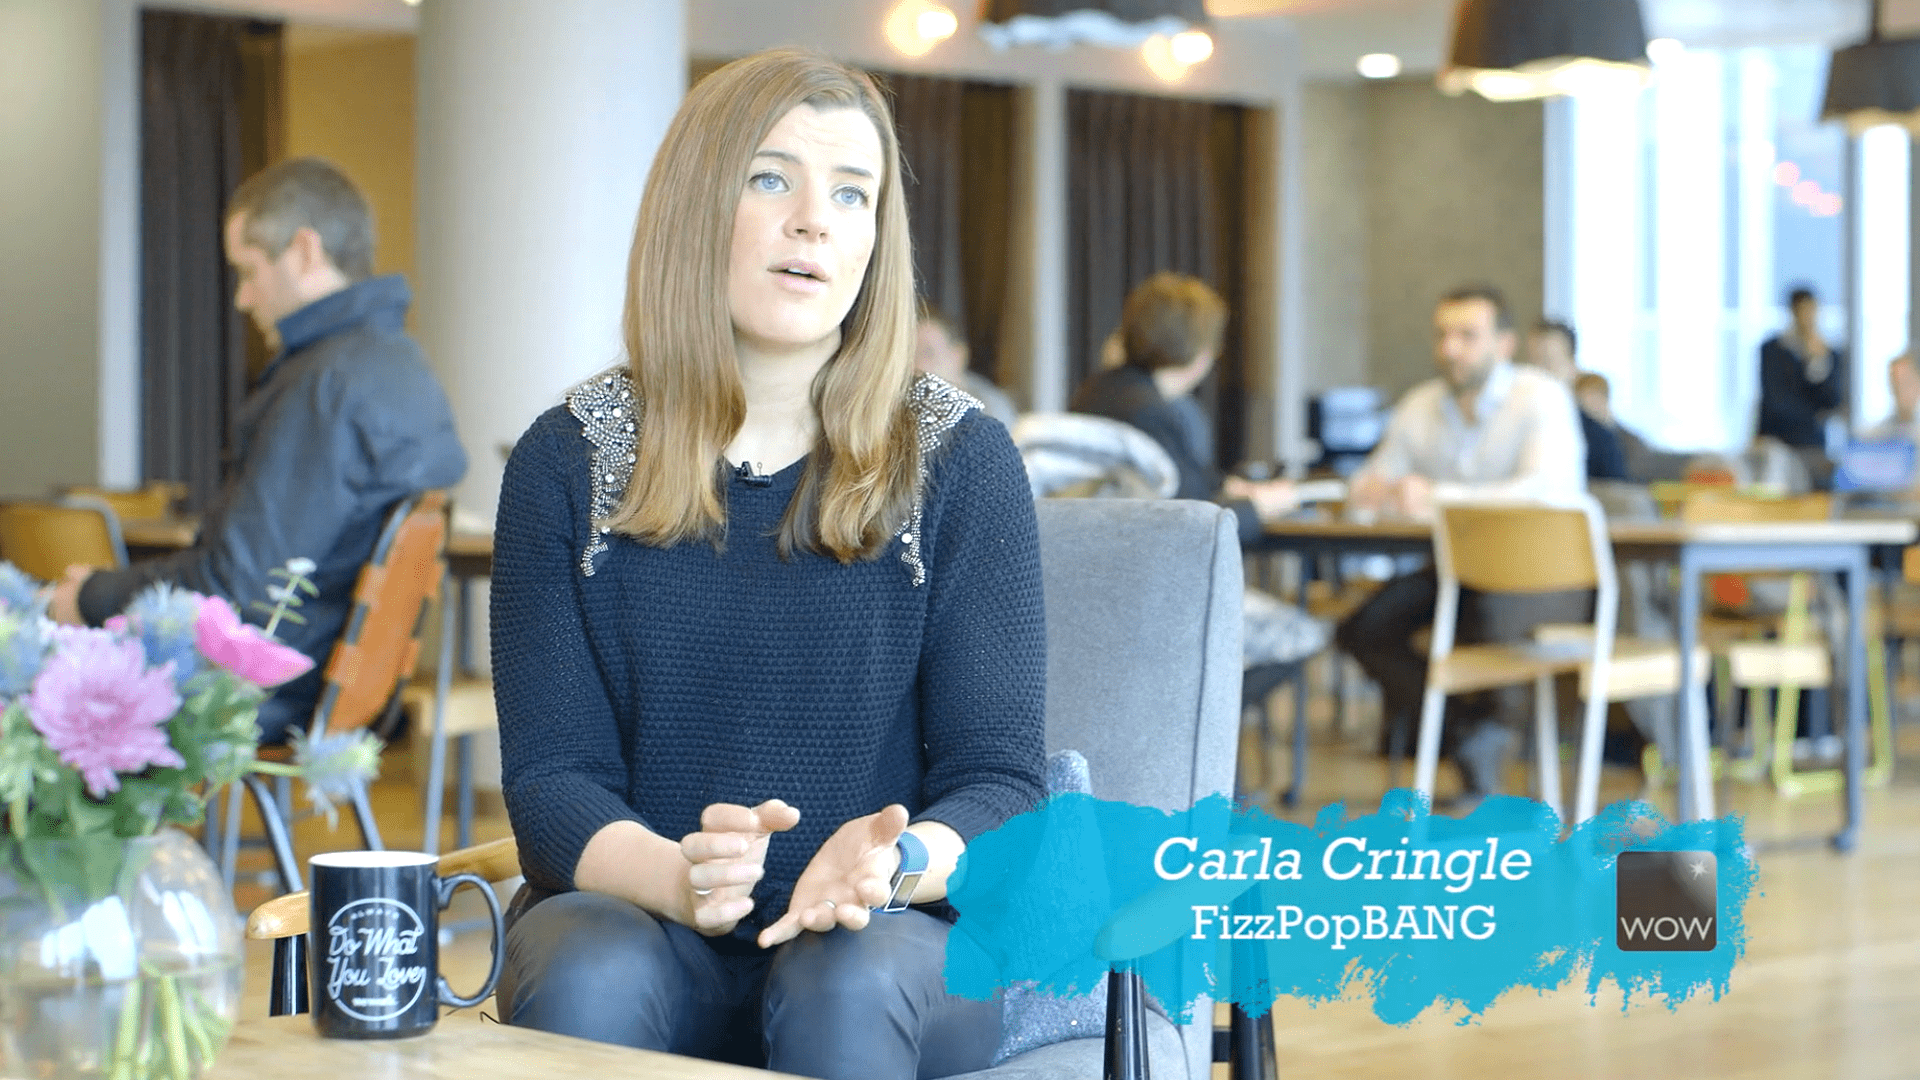 Carla Cringle, Co-founder of workplace culture experts FizzPopBANG on working with The Wow Company Accountants